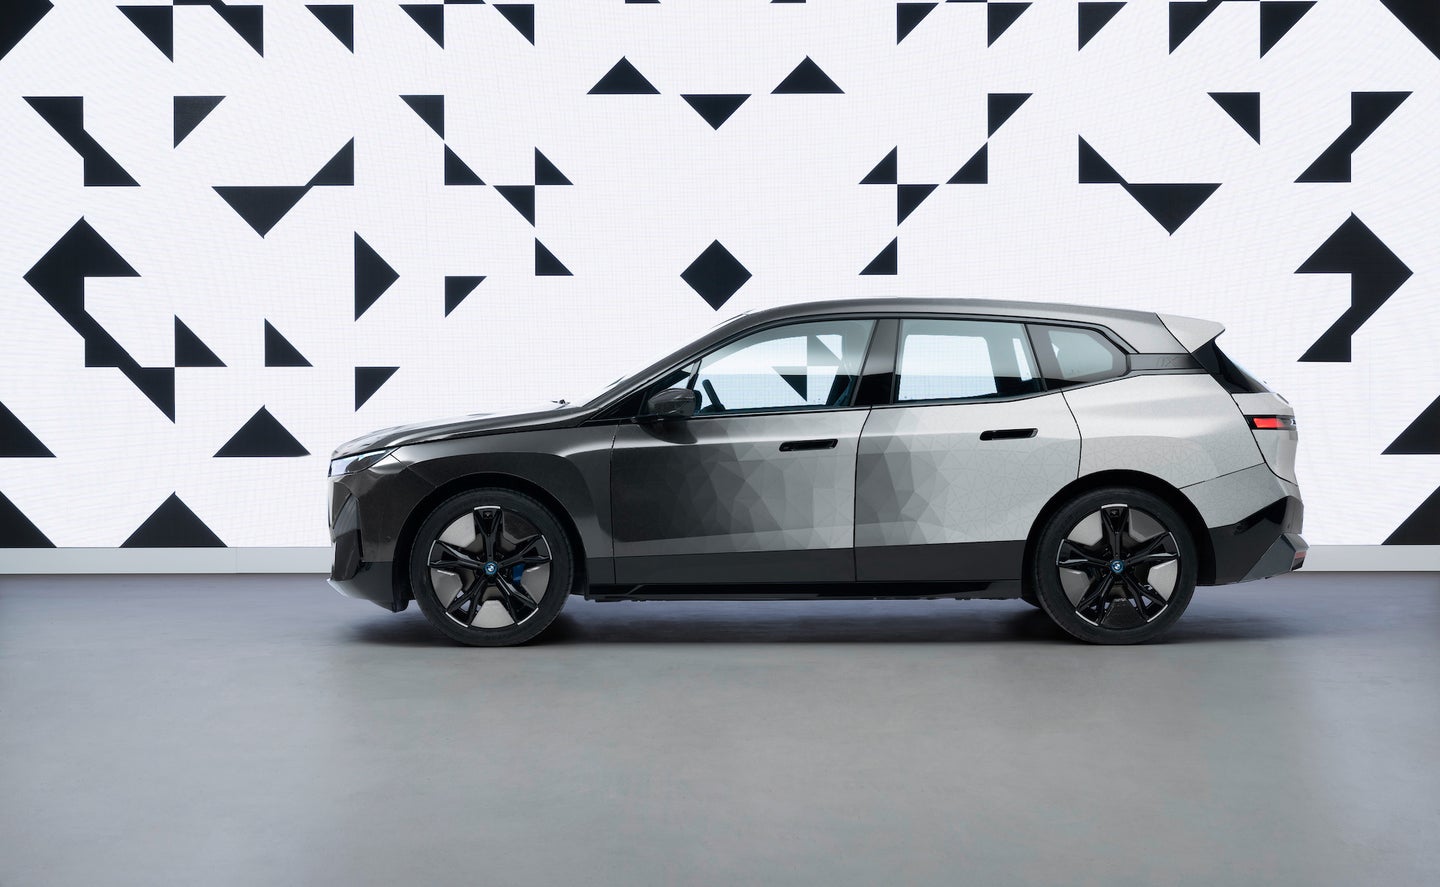 See BMW’s Wild Color-Changing Car in Action